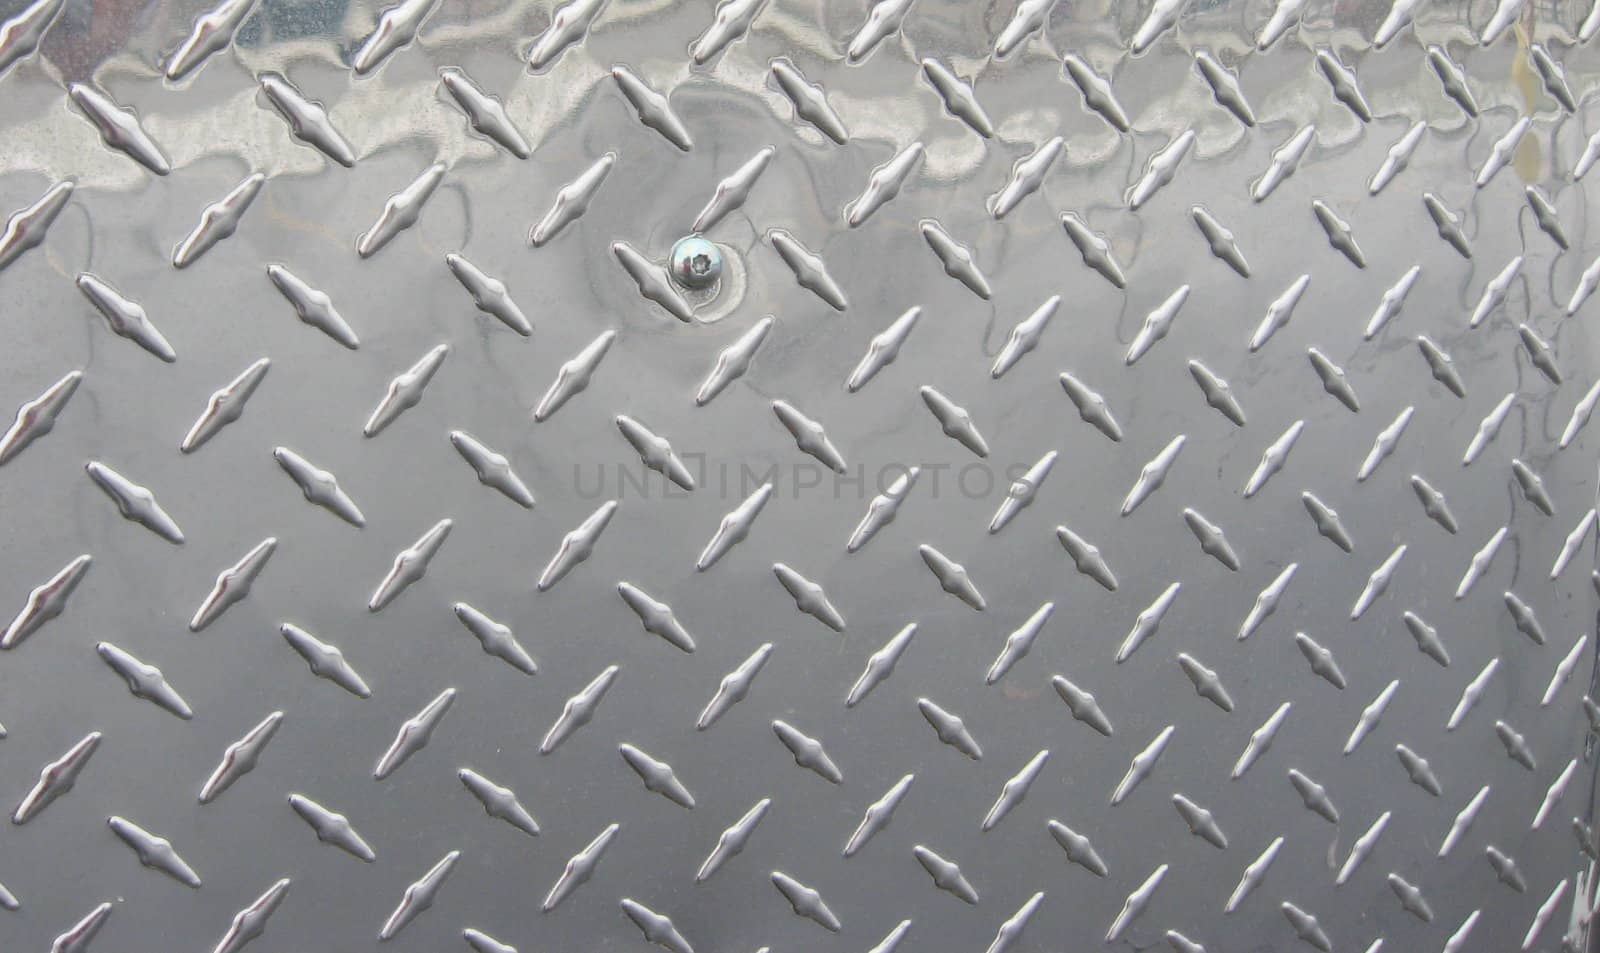 silver-colored diamond plate steel, useful for background, pattern, design